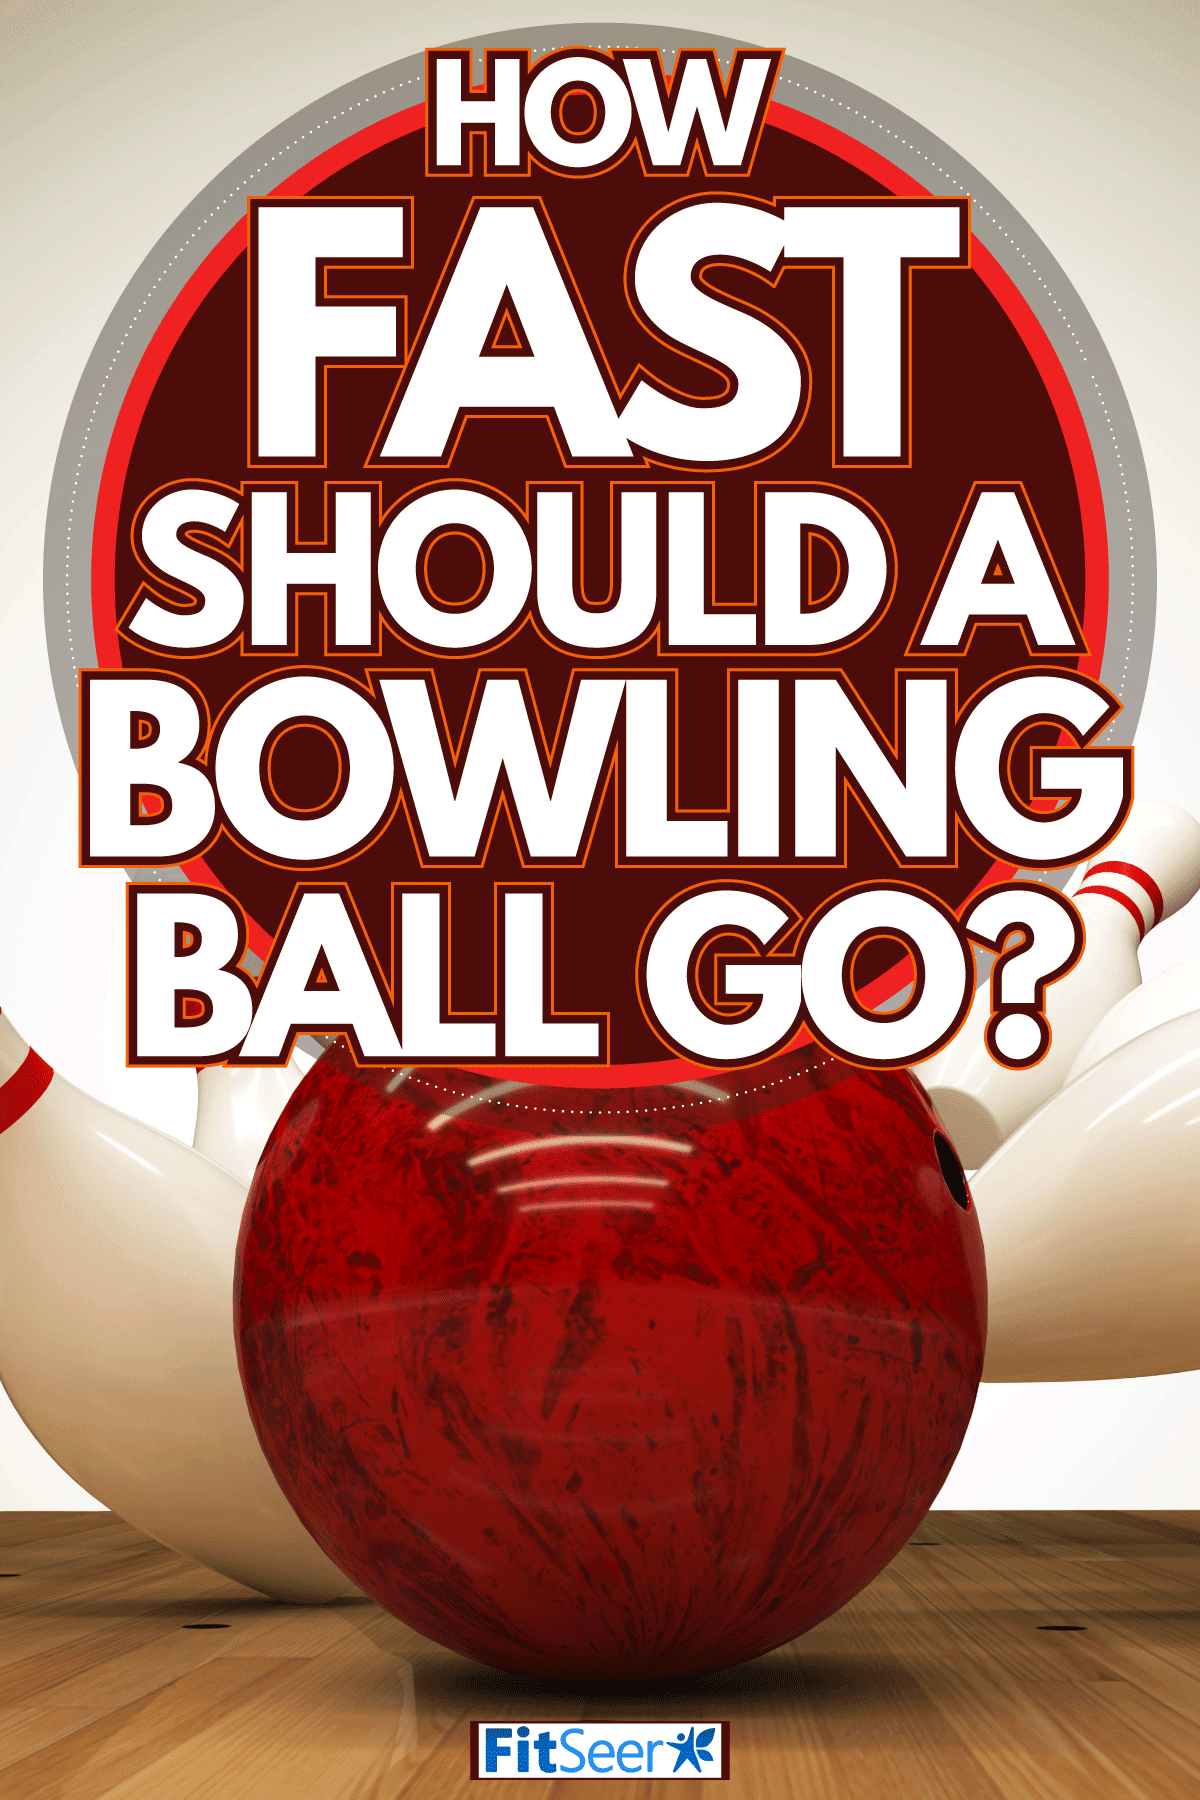 Bowling strike hit, How Fast Should A Bowling Ball Go?